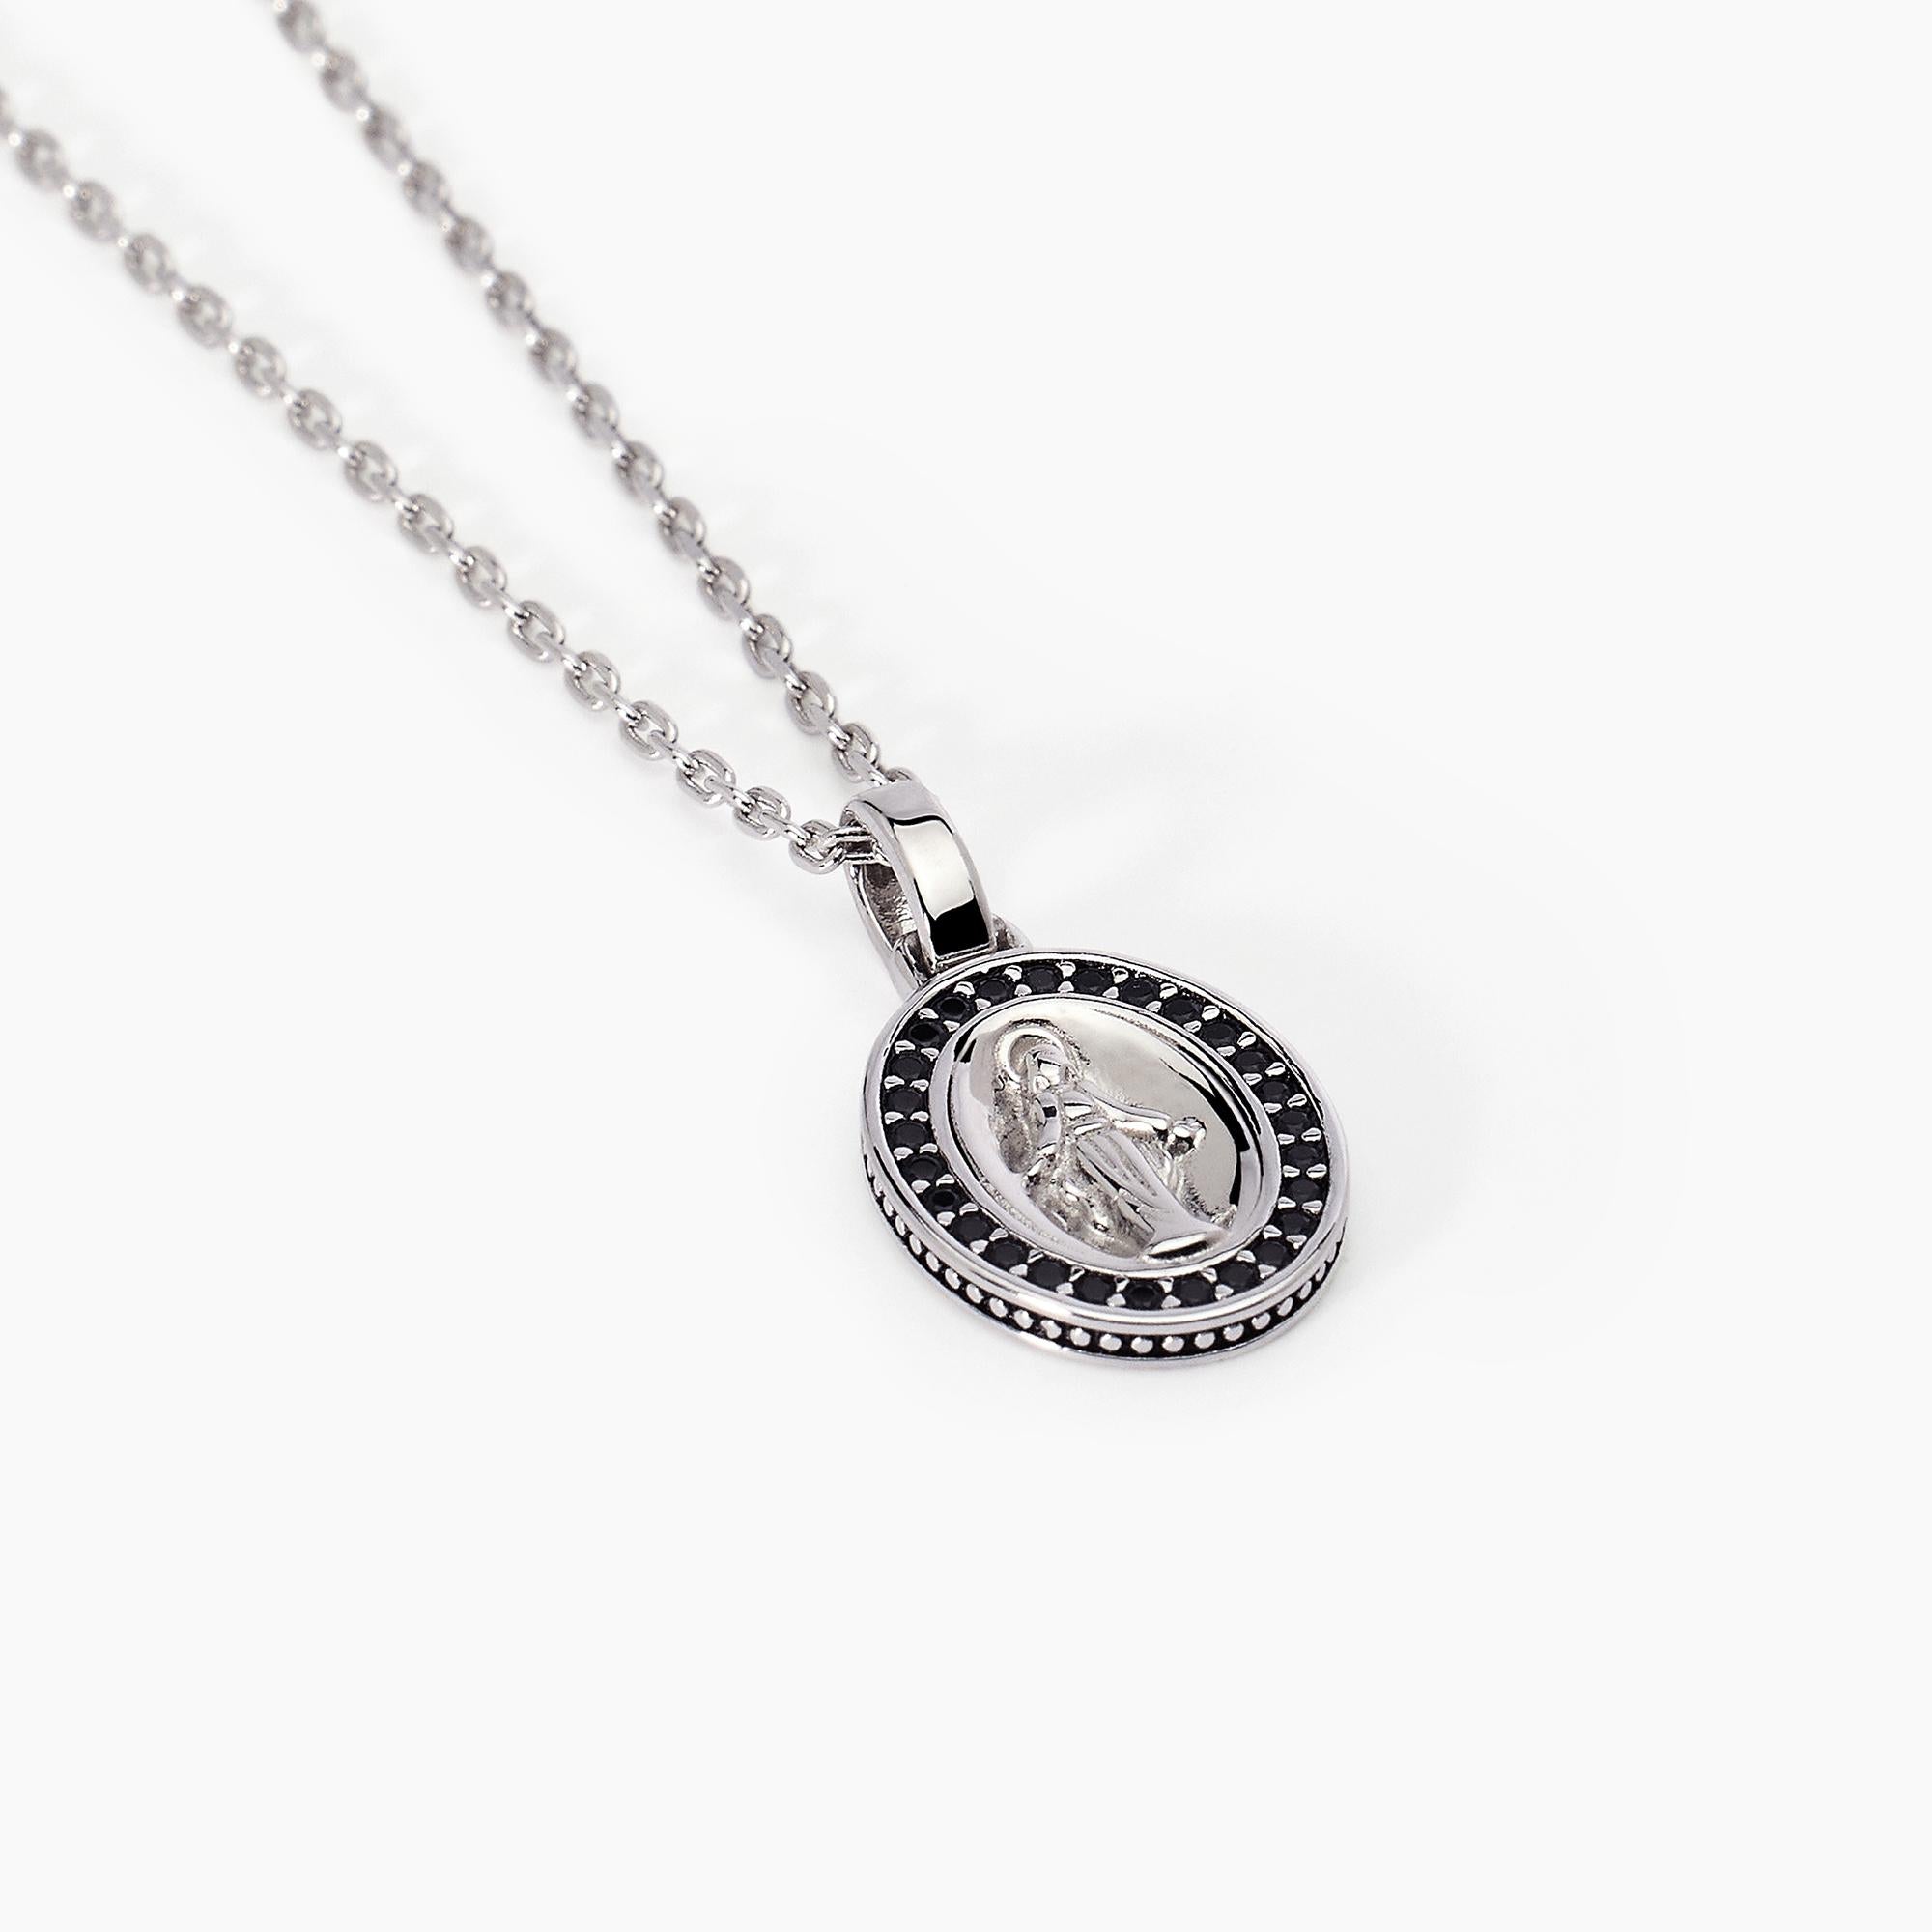 Mabina Man - Silver necklace with MYSTICAL pendant - 553568